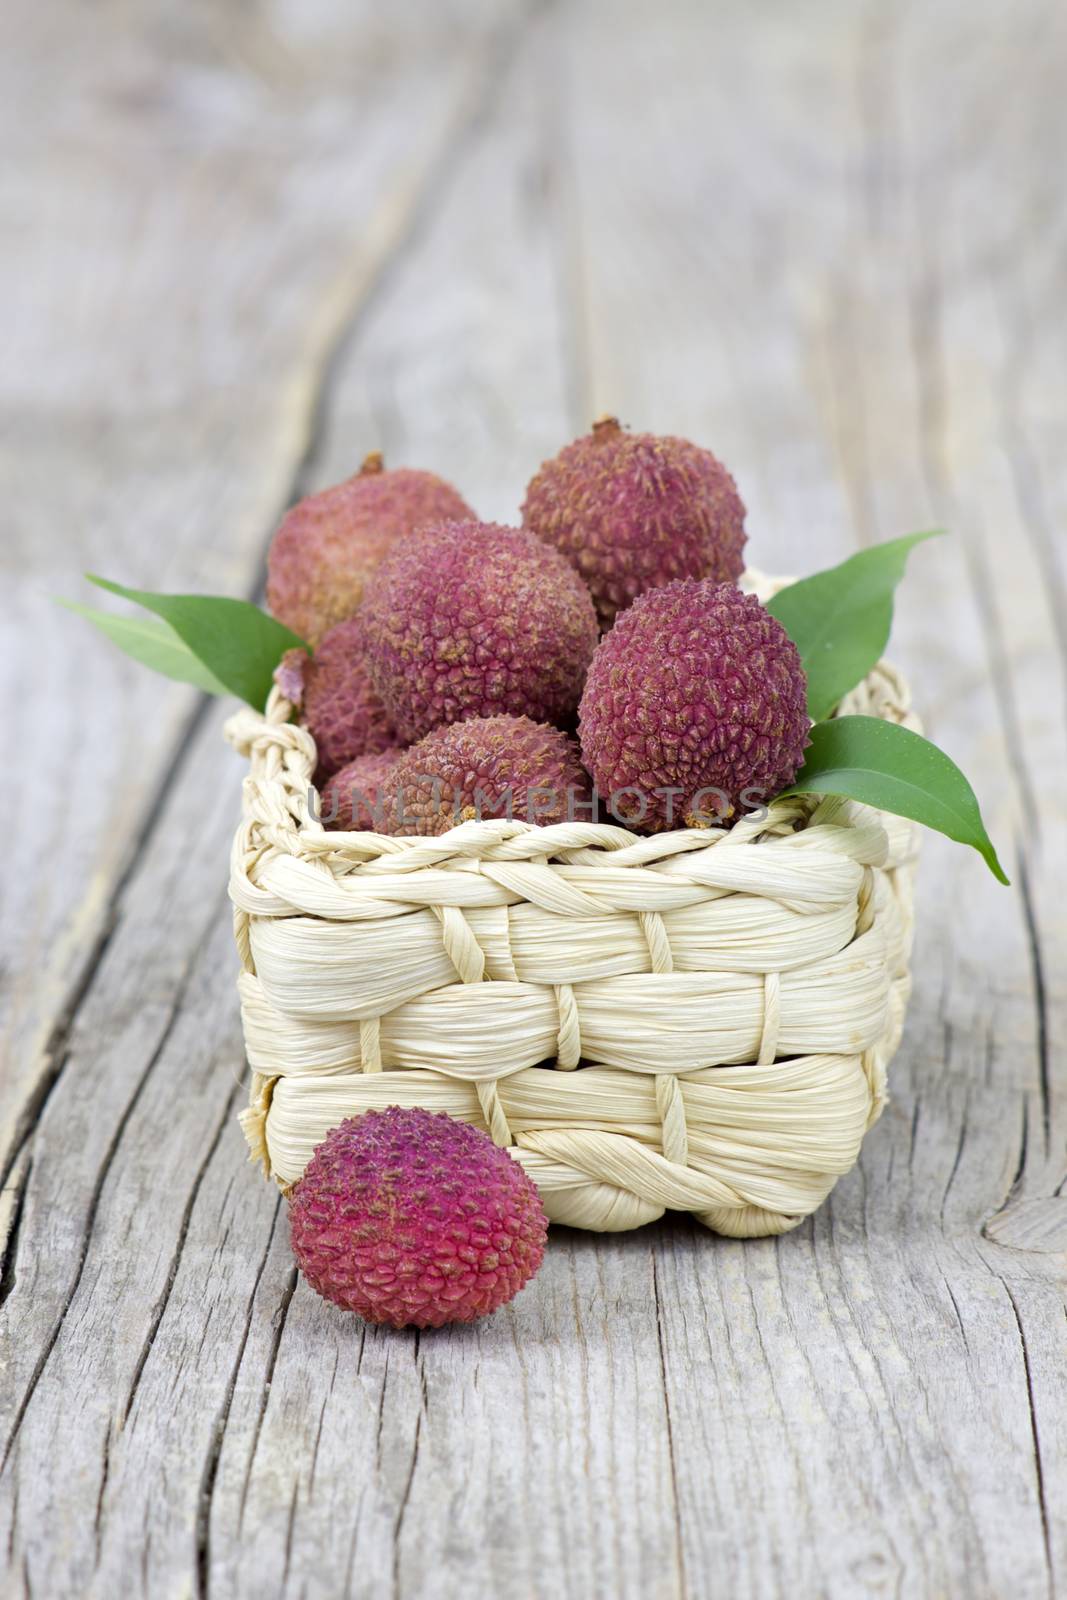 fresh lychees in a basket on wooden background by miradrozdowski